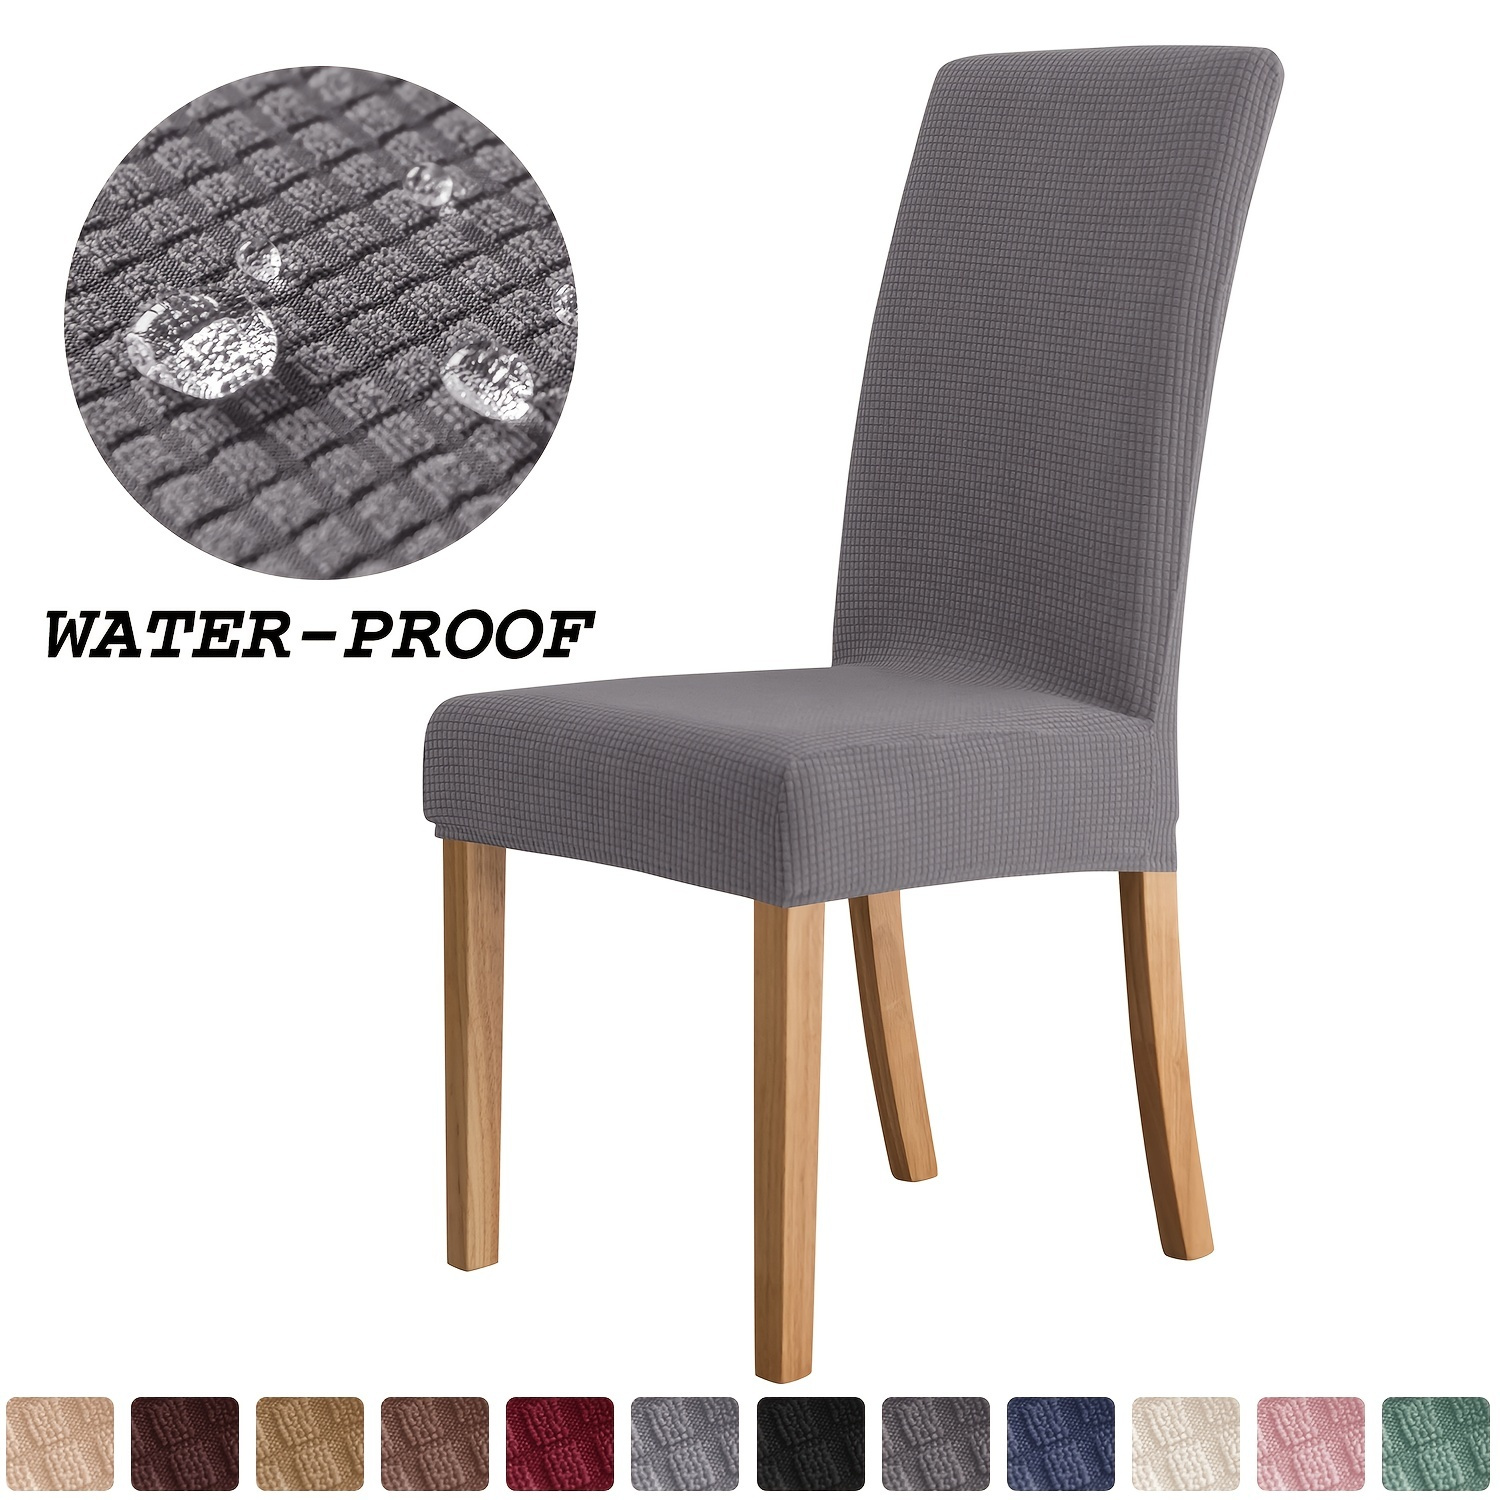 

1pc Protect Your Dining Chairs With Water-resistant Slipcovers - Easy To Clean And Durable